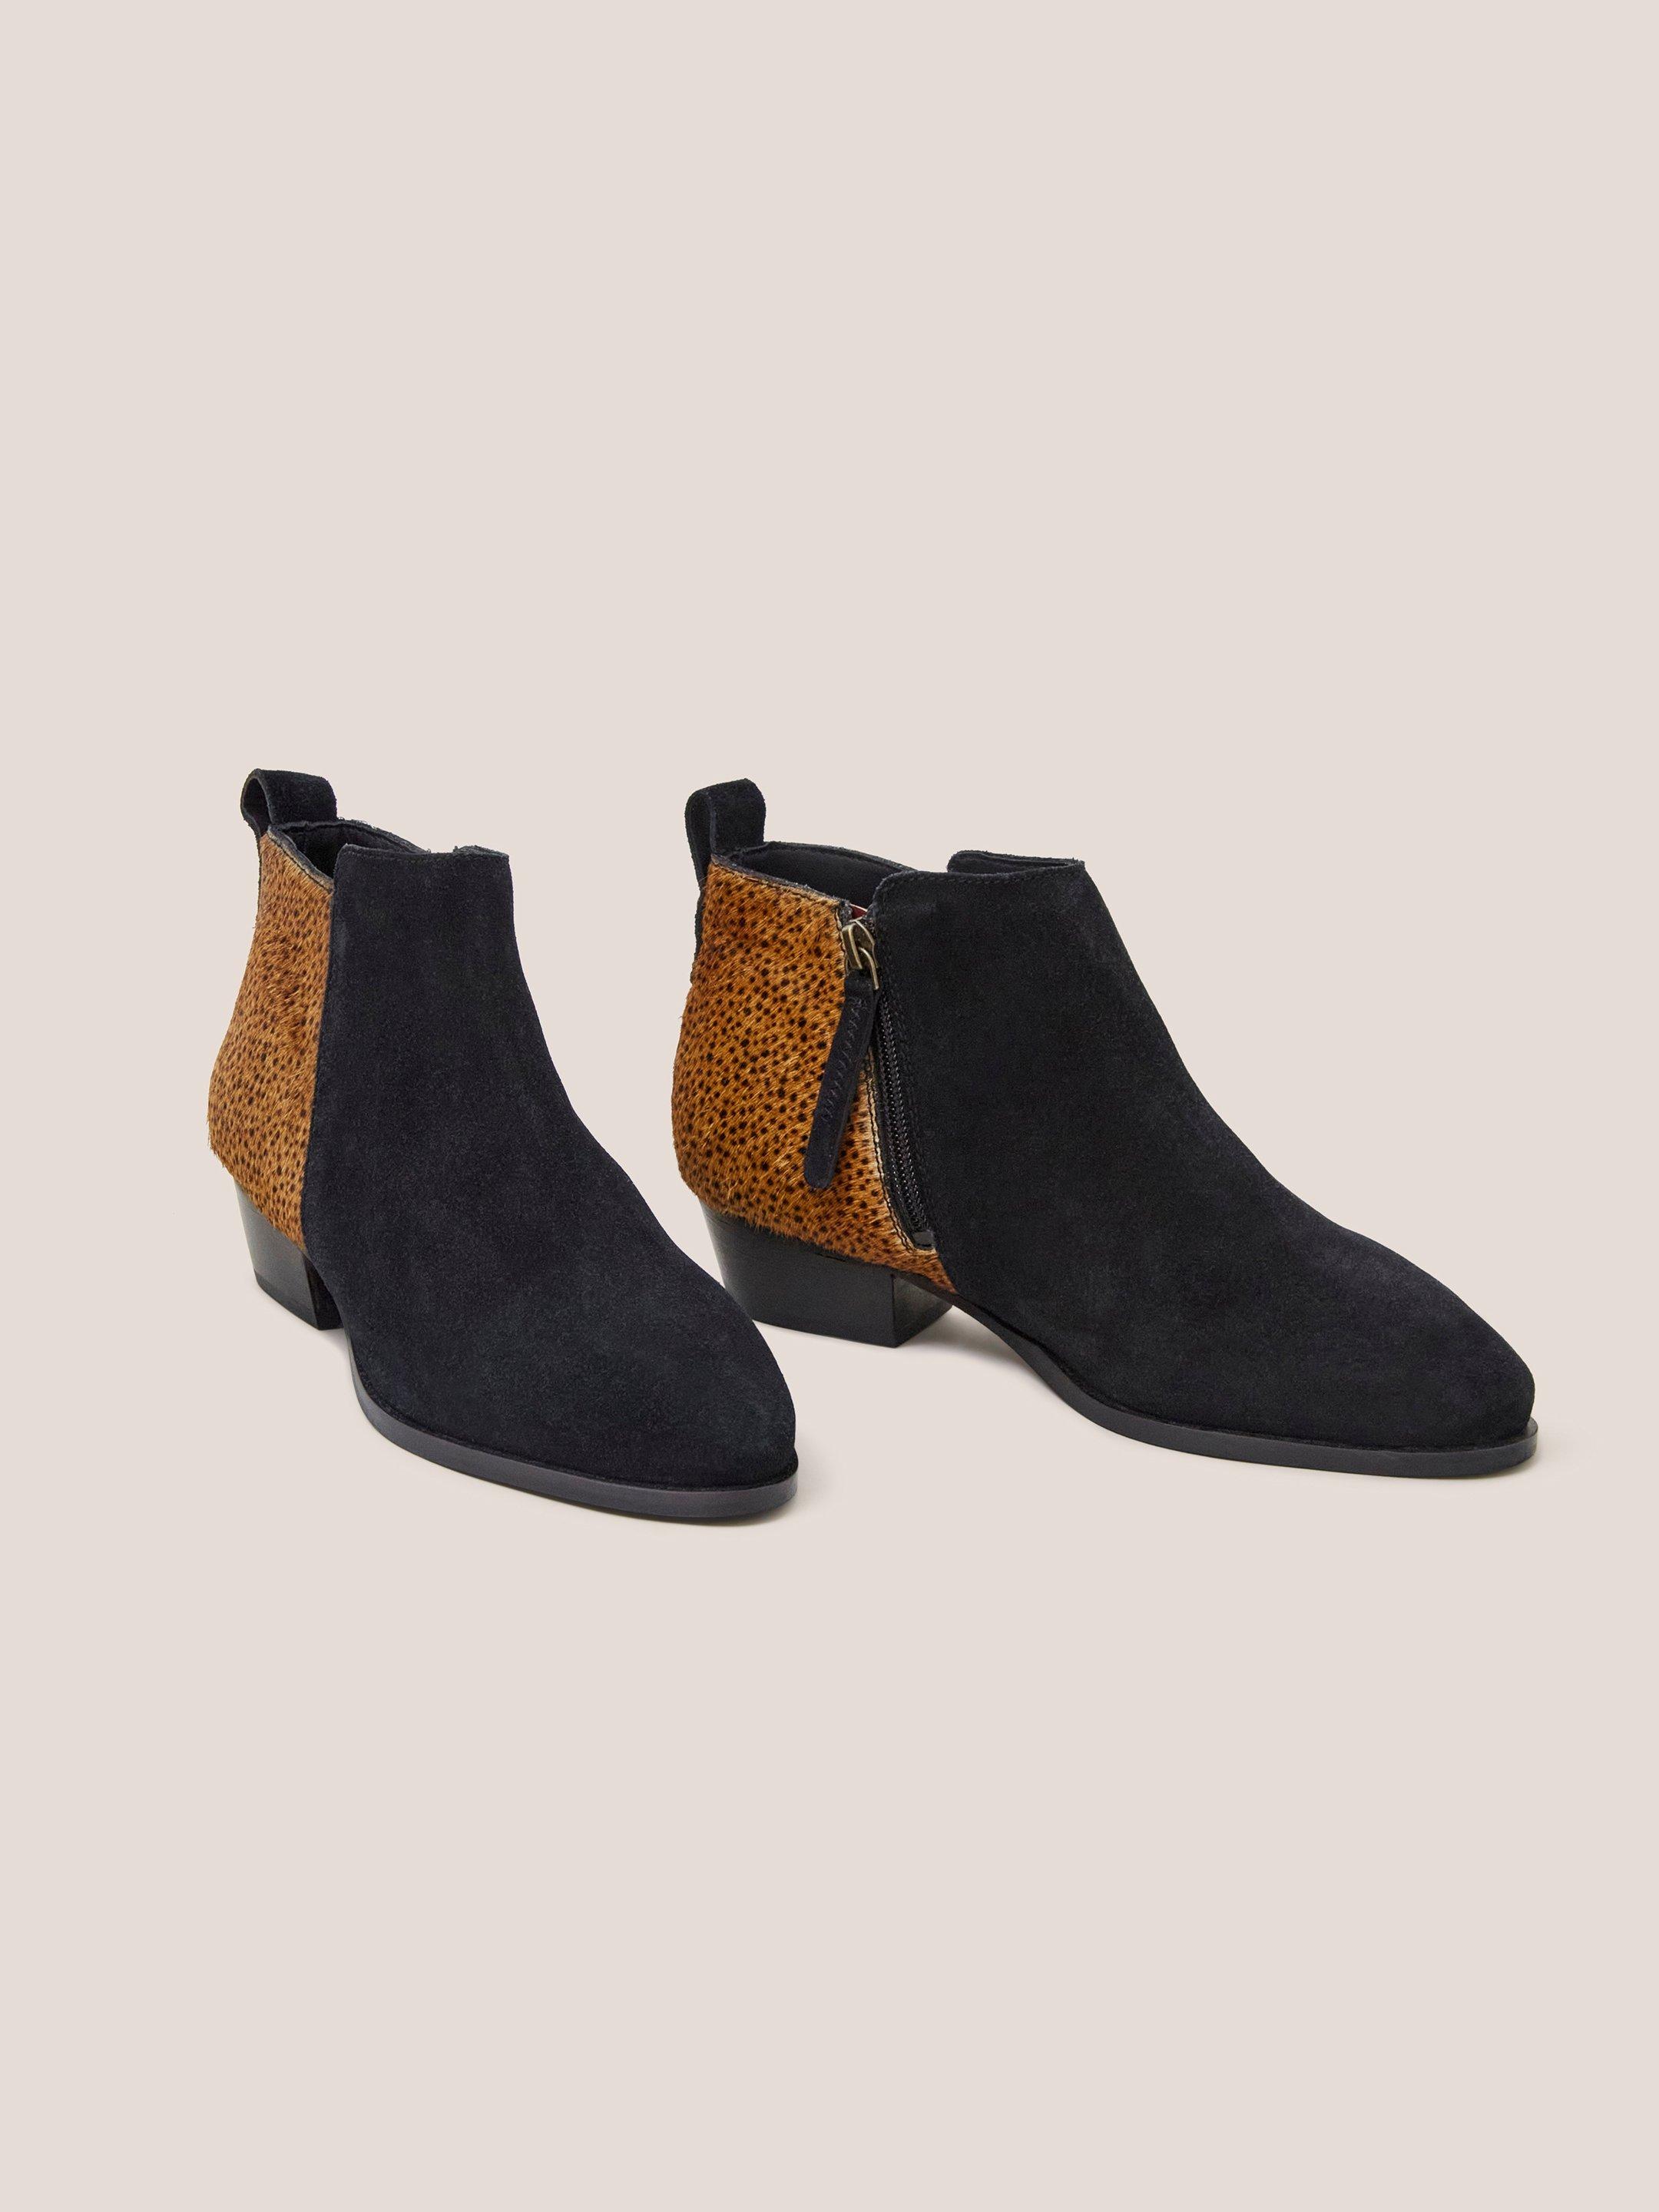 Wide Fit Suede Pony Ankle Boot in BLK PR - FLAT FRONT